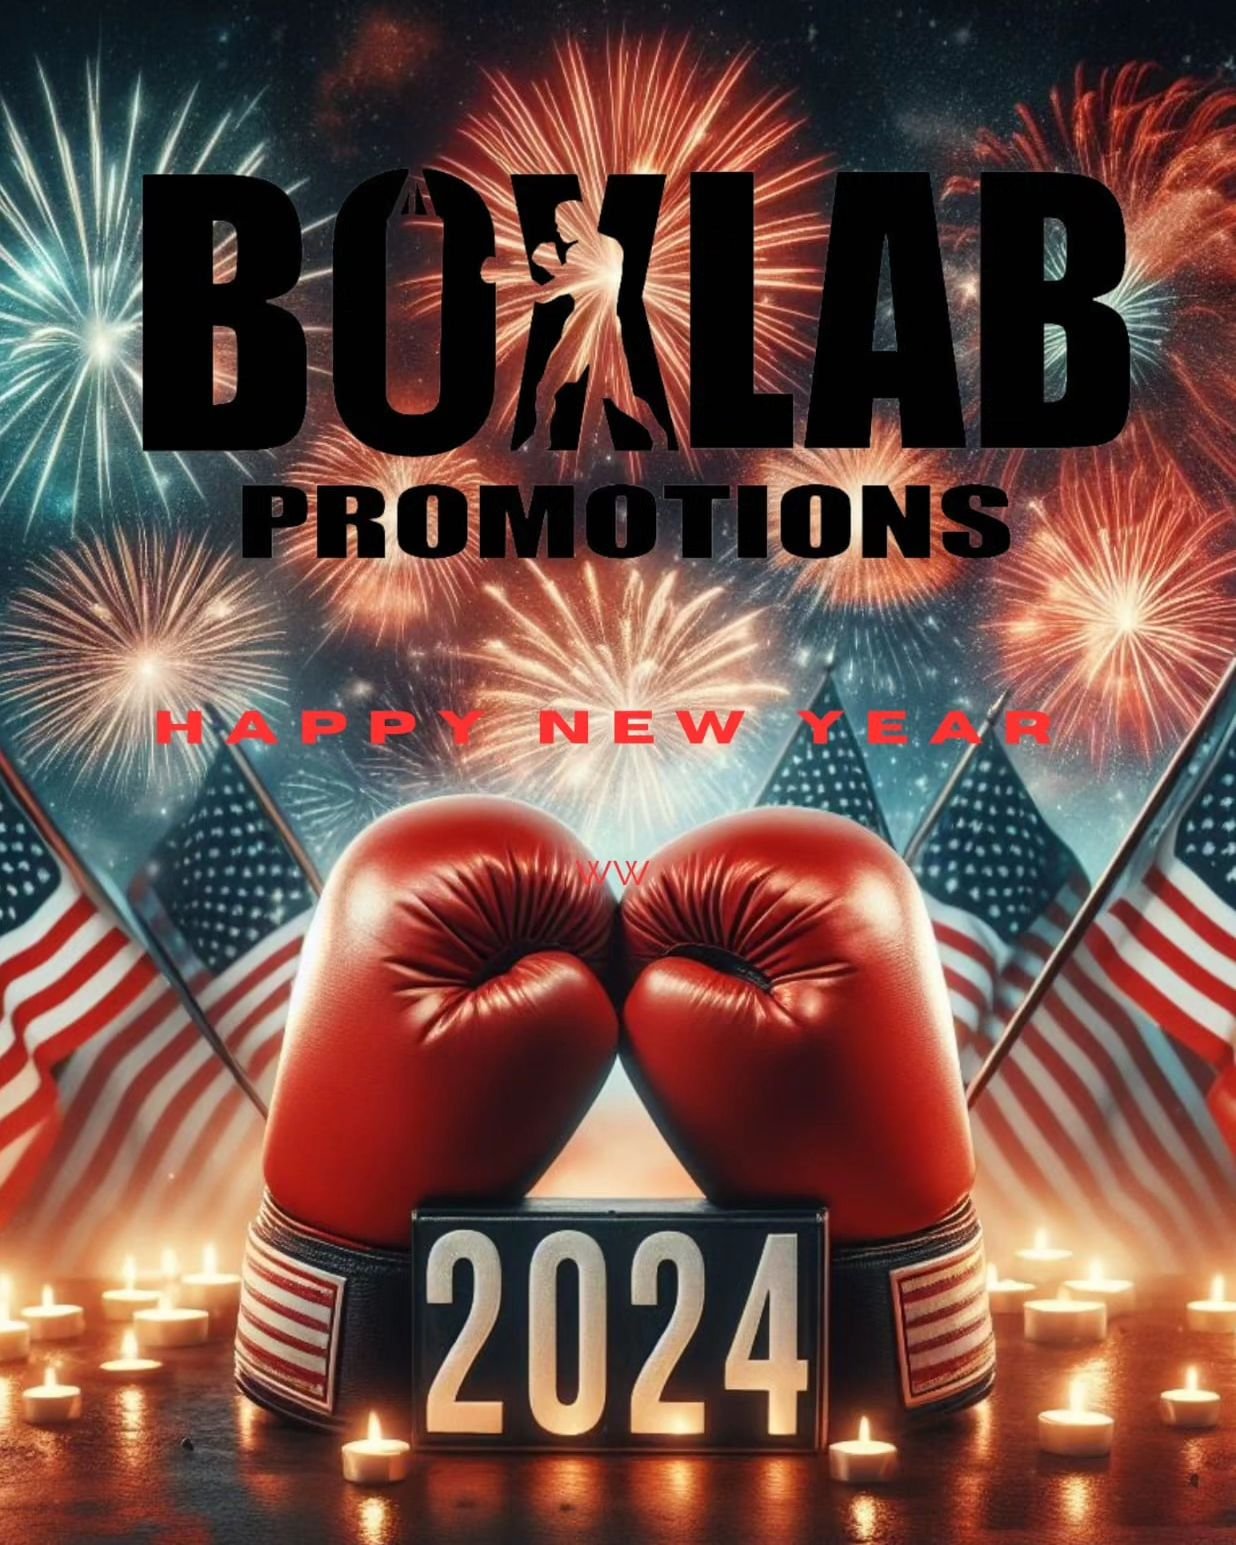 #everyone Cheers to a fresh start, limitless happiness, and new opportunities. May this New Year bring you everything you desire and more. A very Happy 2024! #boxlabpromotions 
.
#happynewyear #2024 #boxing #boxeo #peace #love #joy #newopportunities 